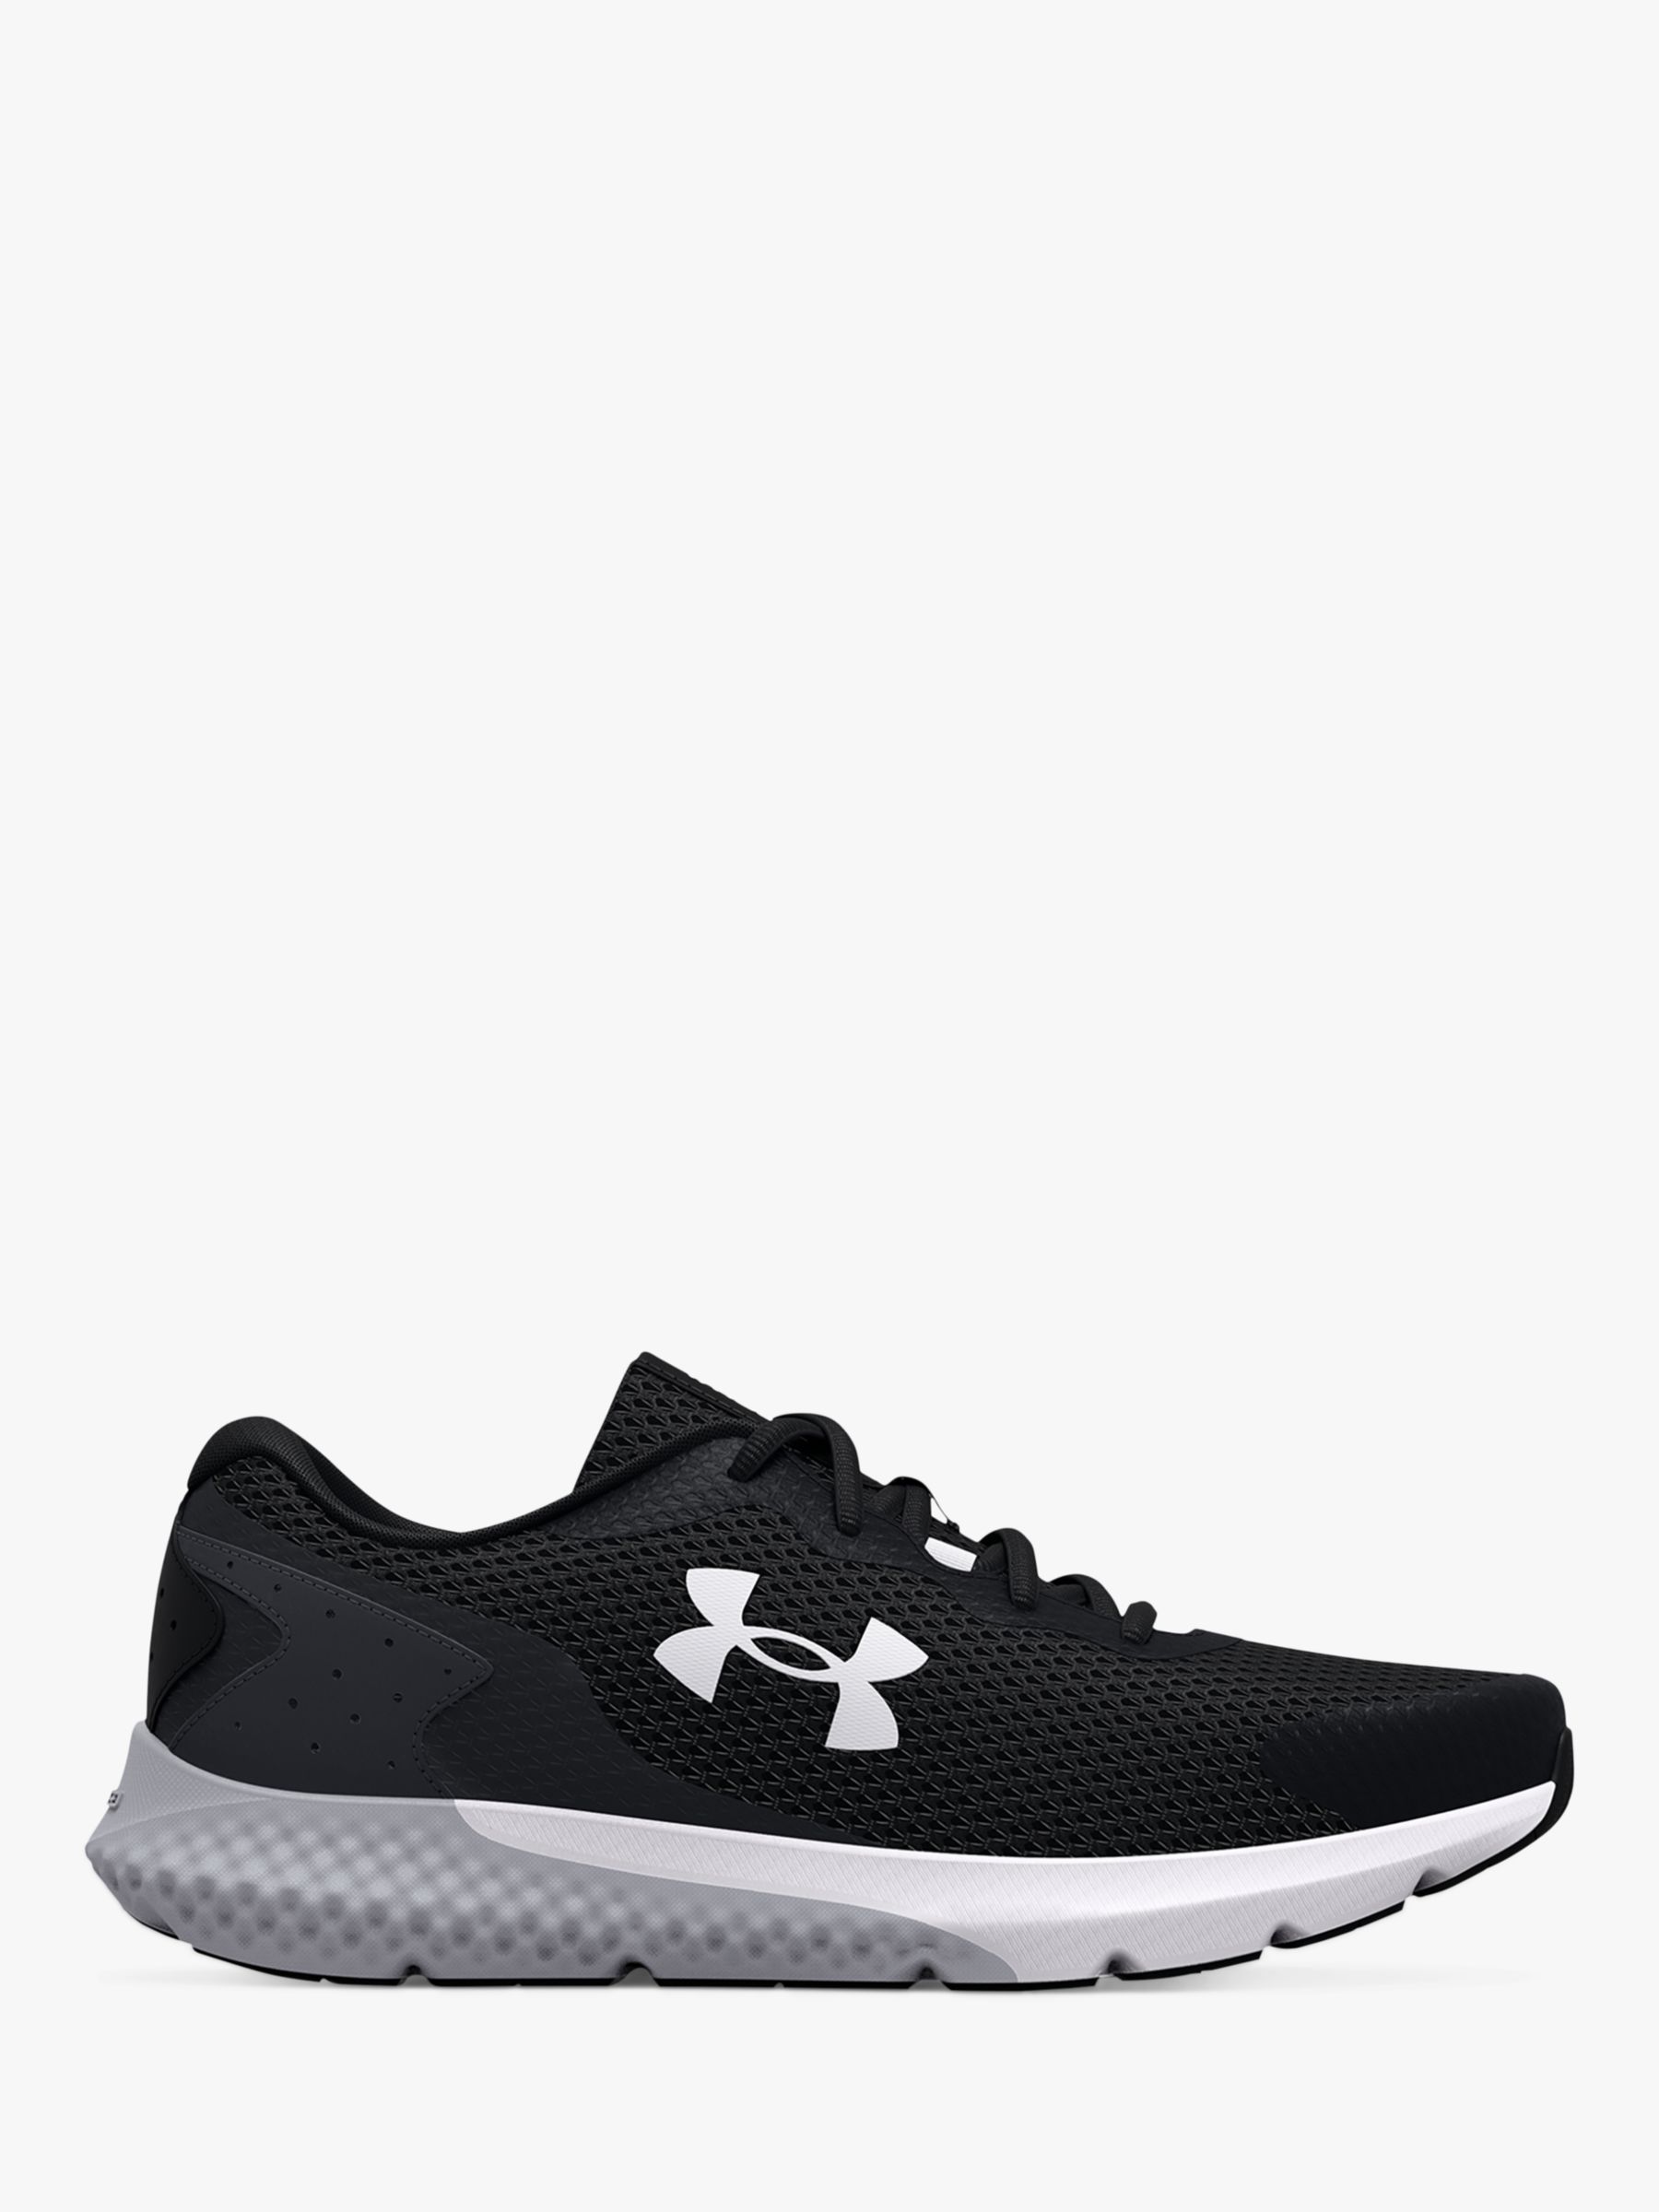 Under Armour Charged Rogue 3 Men's Running Shoes at John Lewis & Partners